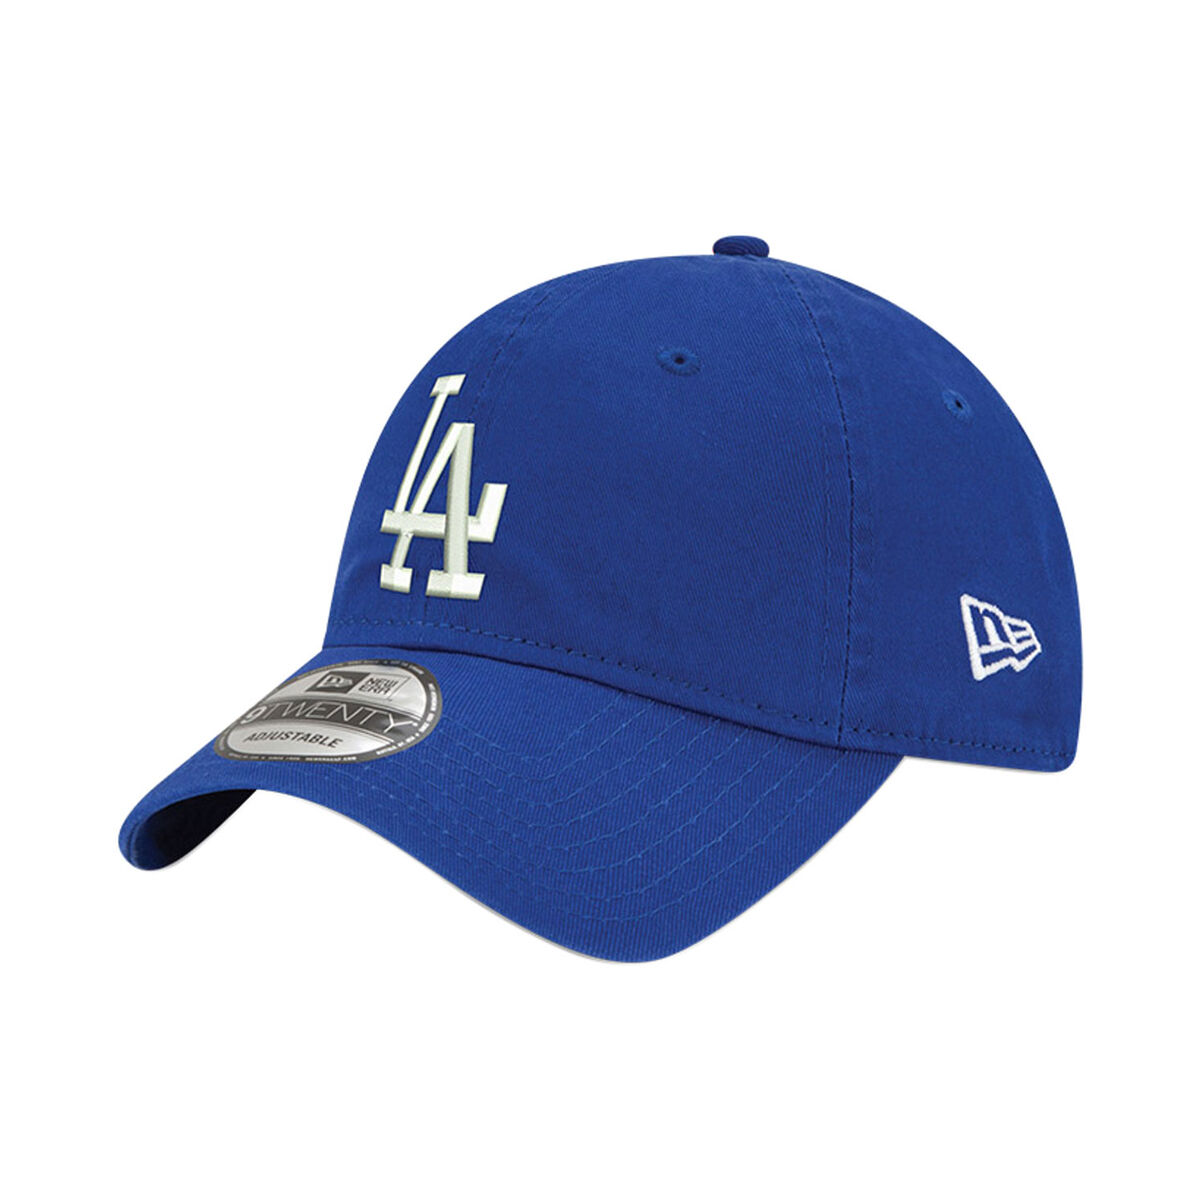 Los Angeles Dodgers Nike Official Replica Road Jersey - Mens with Kershaw  22 printing